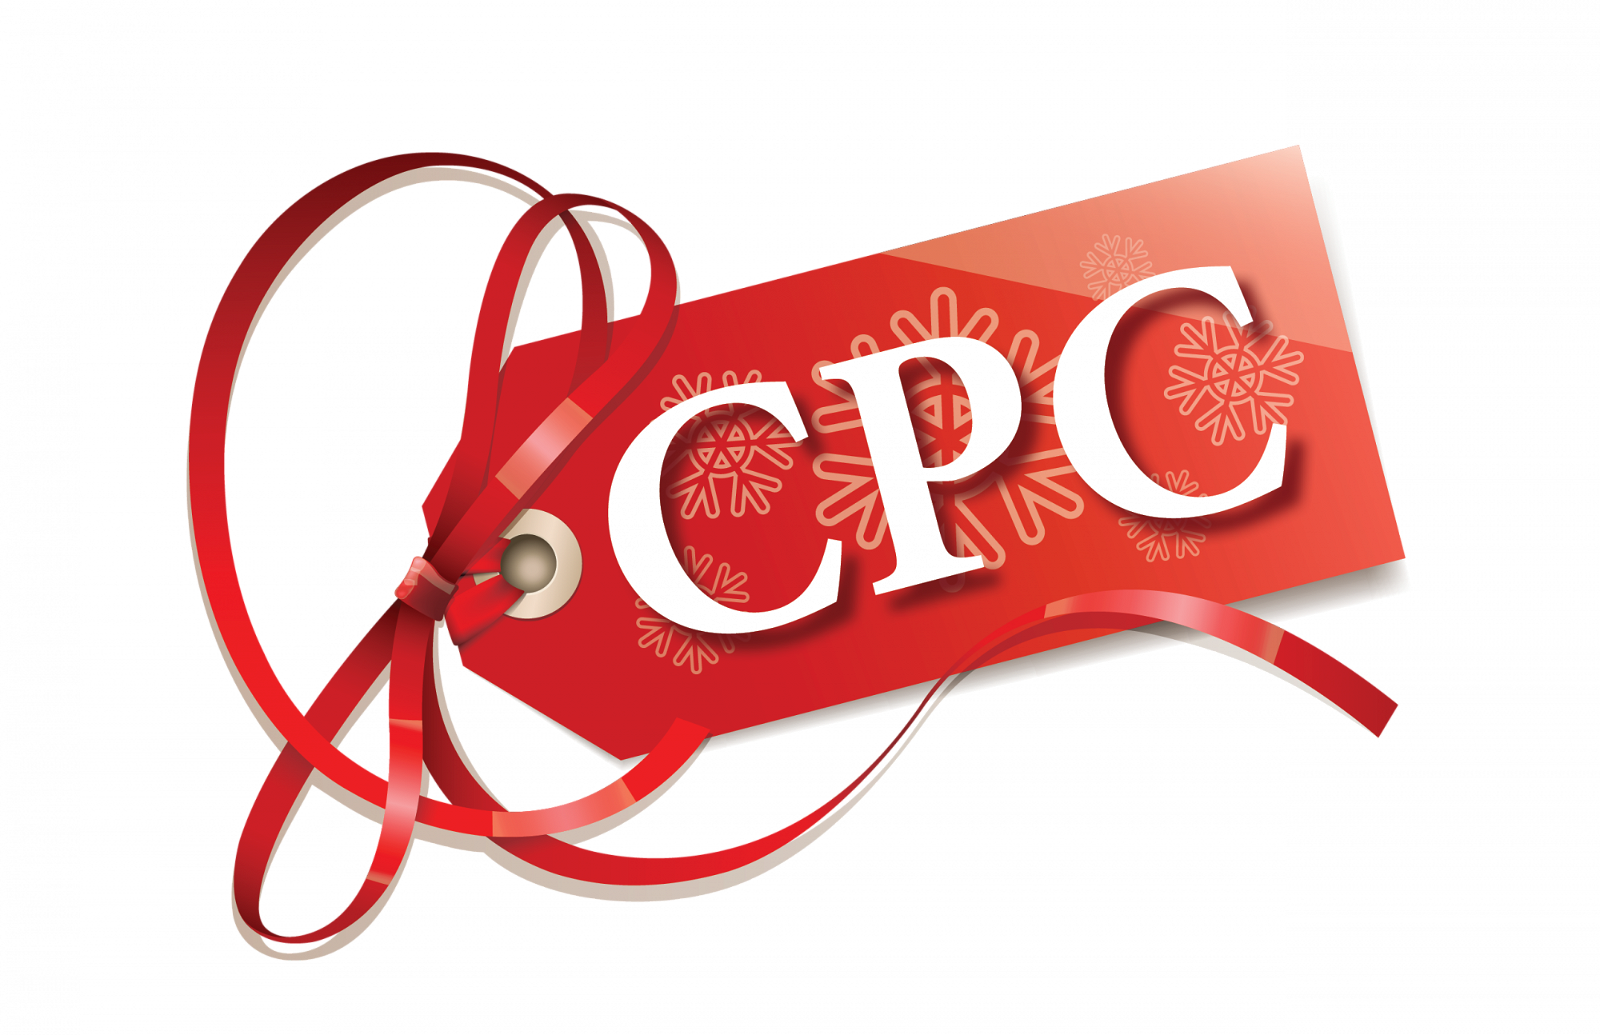 Christmas Party Club logo which is a red gift tag with the letters CPC